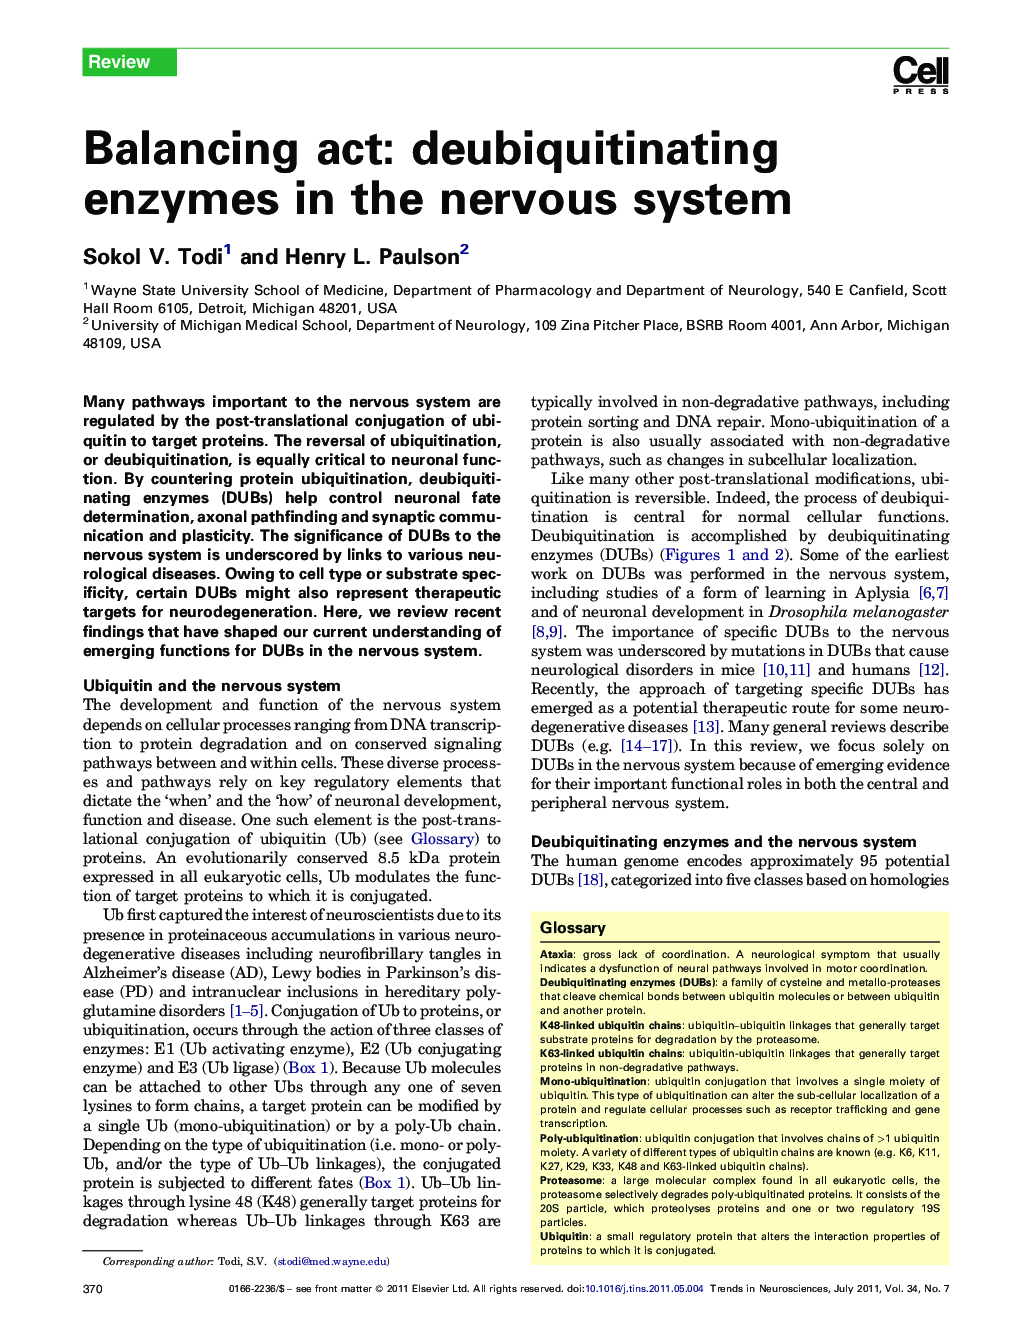 Balancing act: deubiquitinating enzymes in the nervous system